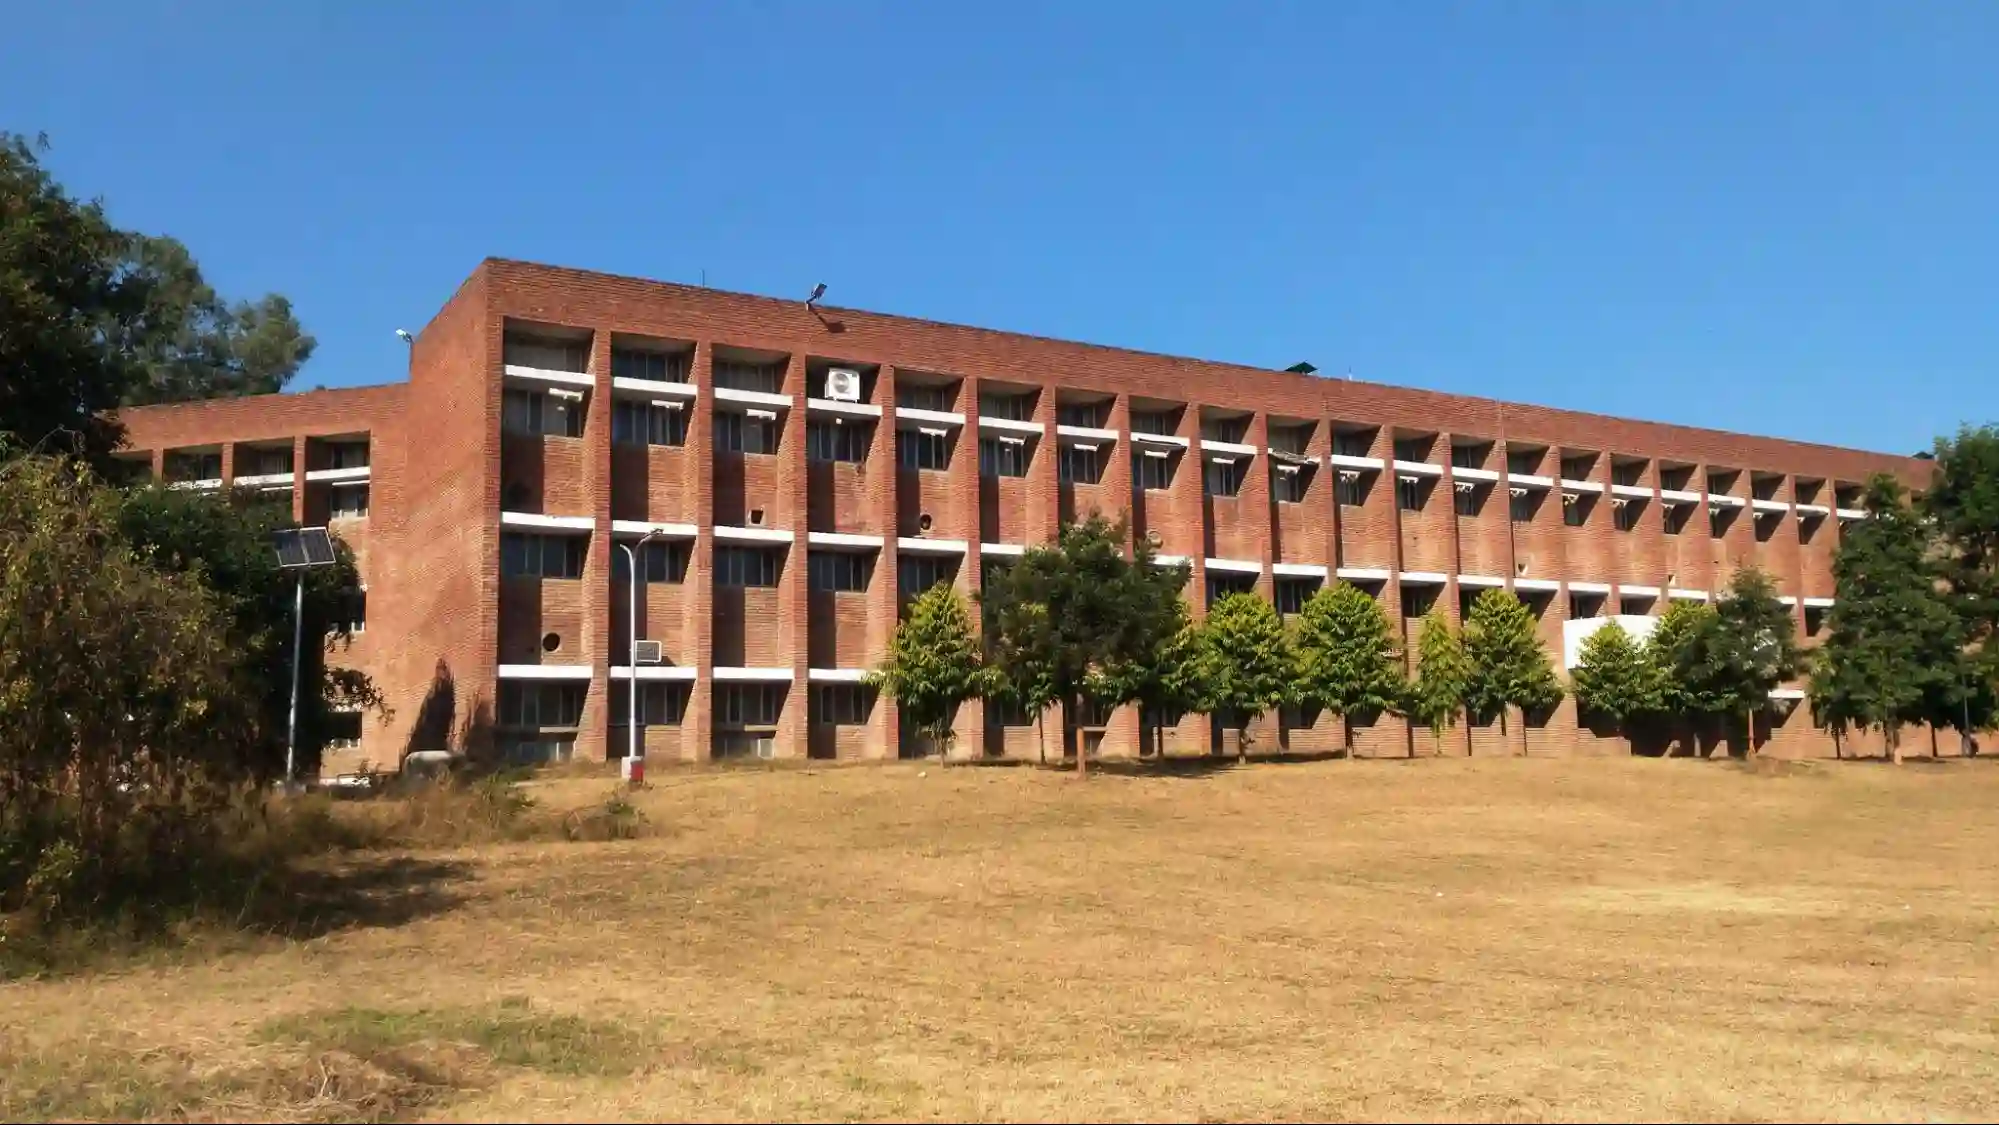  Hostel Block at Government Home Science College in Chandigarh